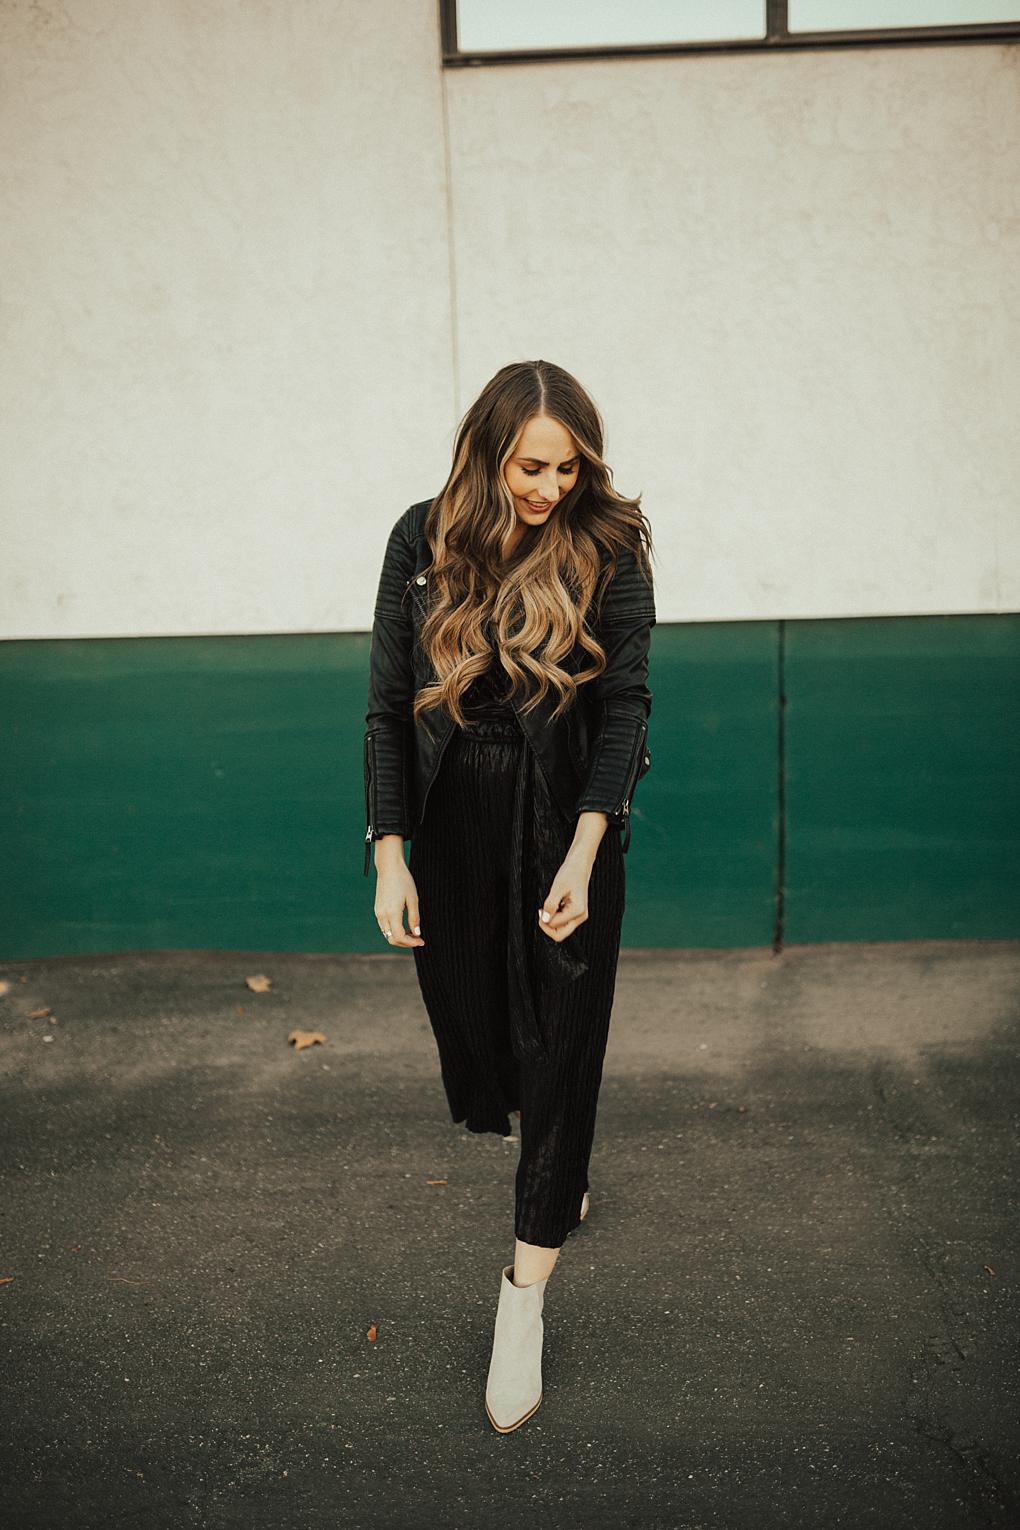 Pairing Textures Together & a Dressy Black Jumpsuit by Utah style blogger Dani Marie